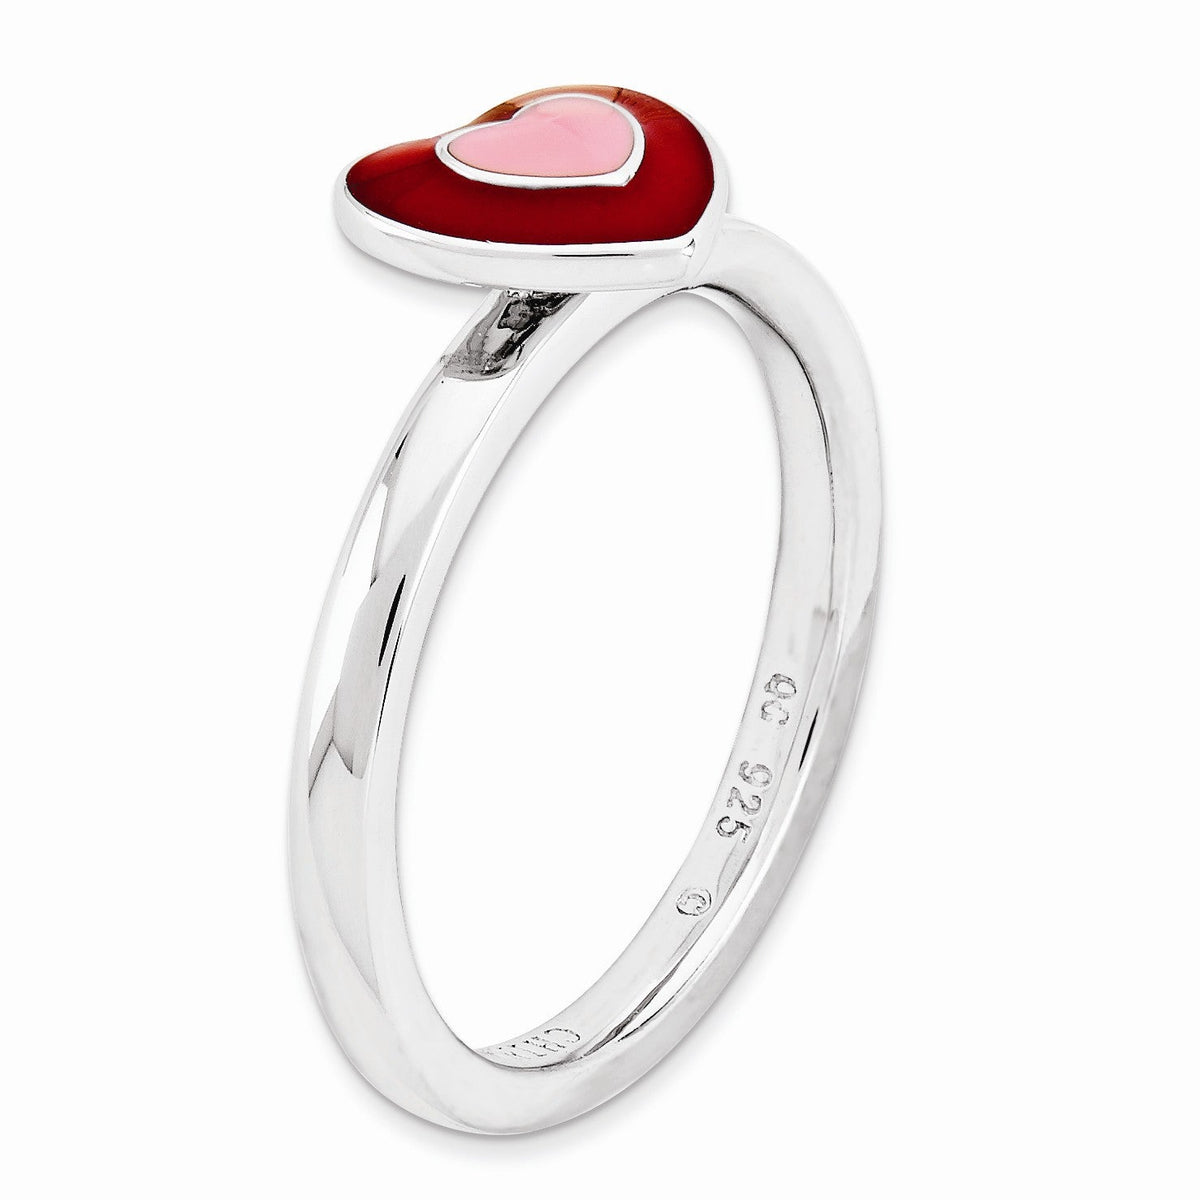 Alternate view of the Sterling Silver Stackable Enameled Heart Ring by The Black Bow Jewelry Co.